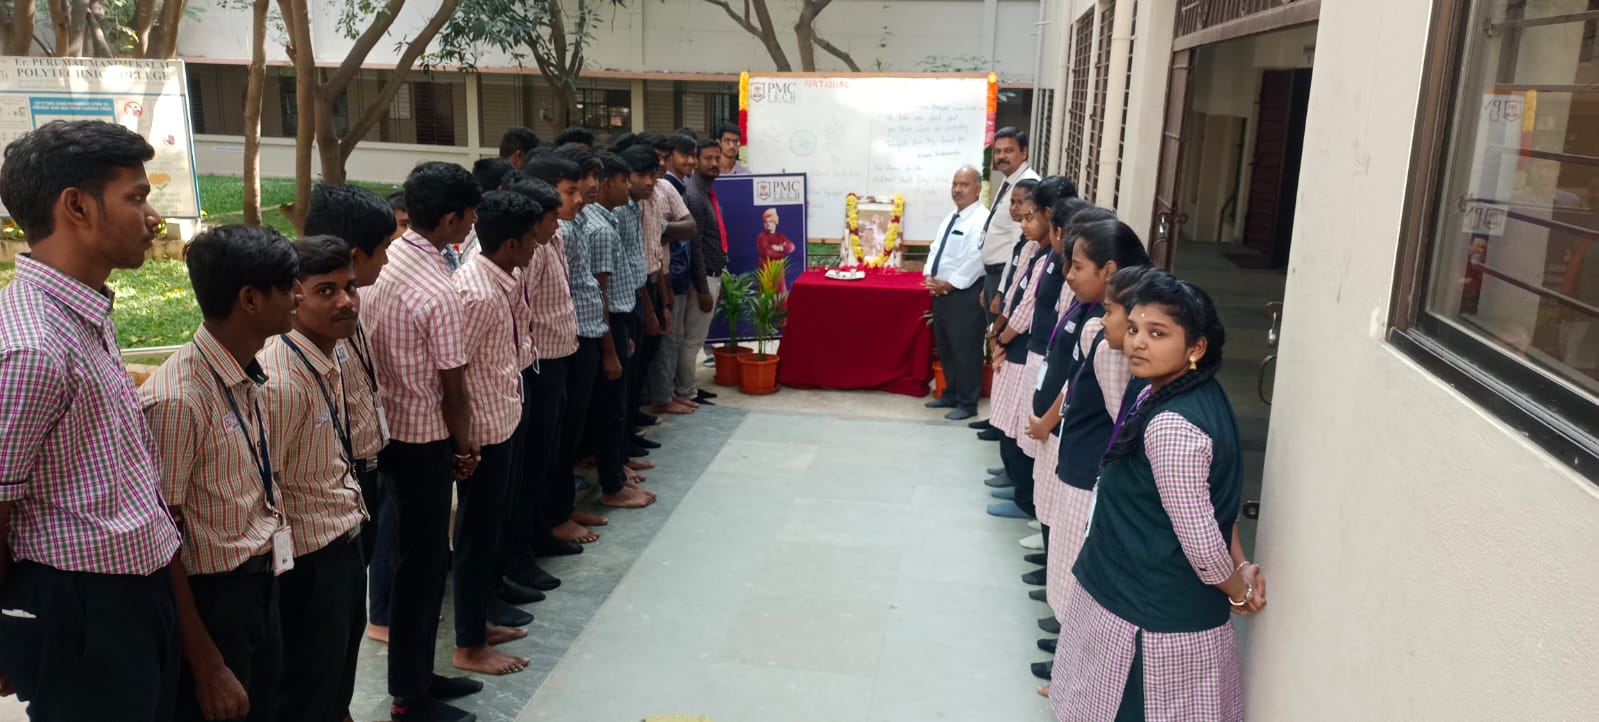 Swami Vivekananda’s Birthday & National Youth Day 2024 celebrated at PMC Polytechnic College.